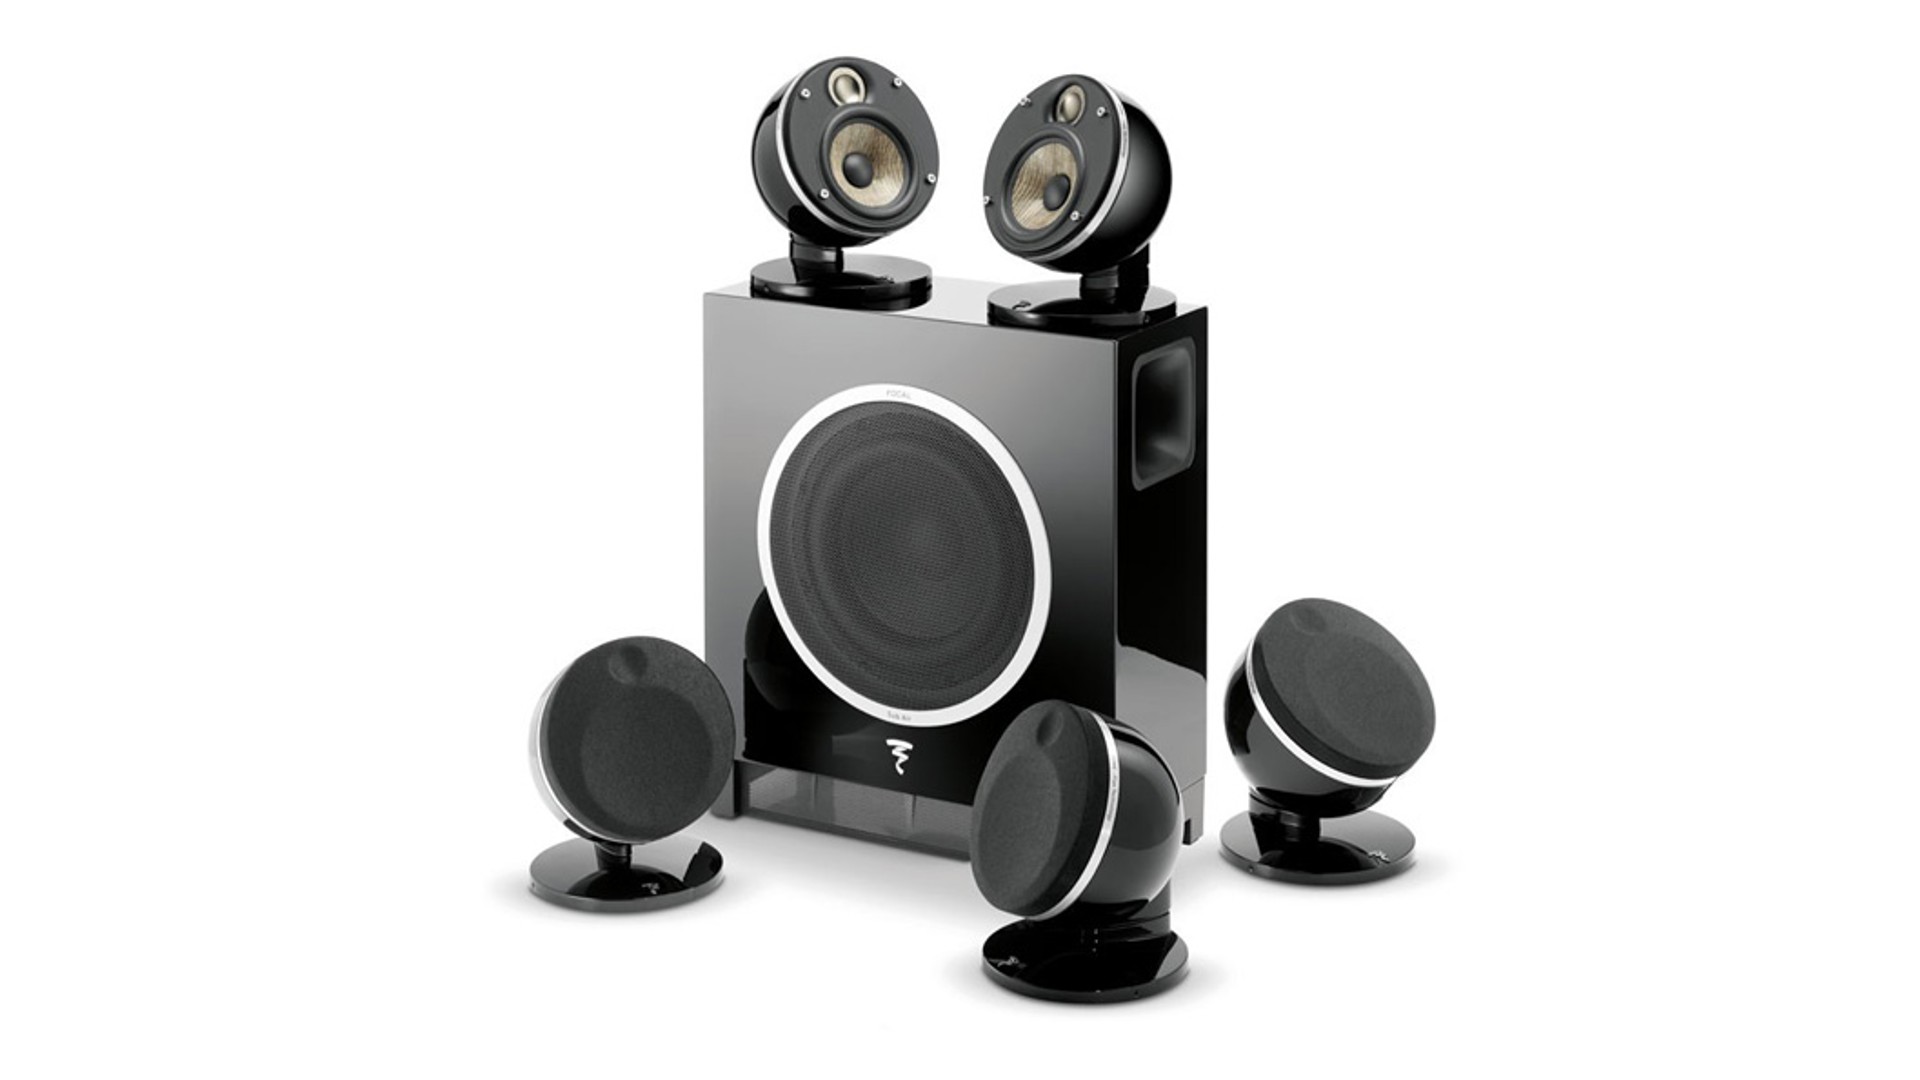 the focal dome flax 5.1 channel speaker system in black